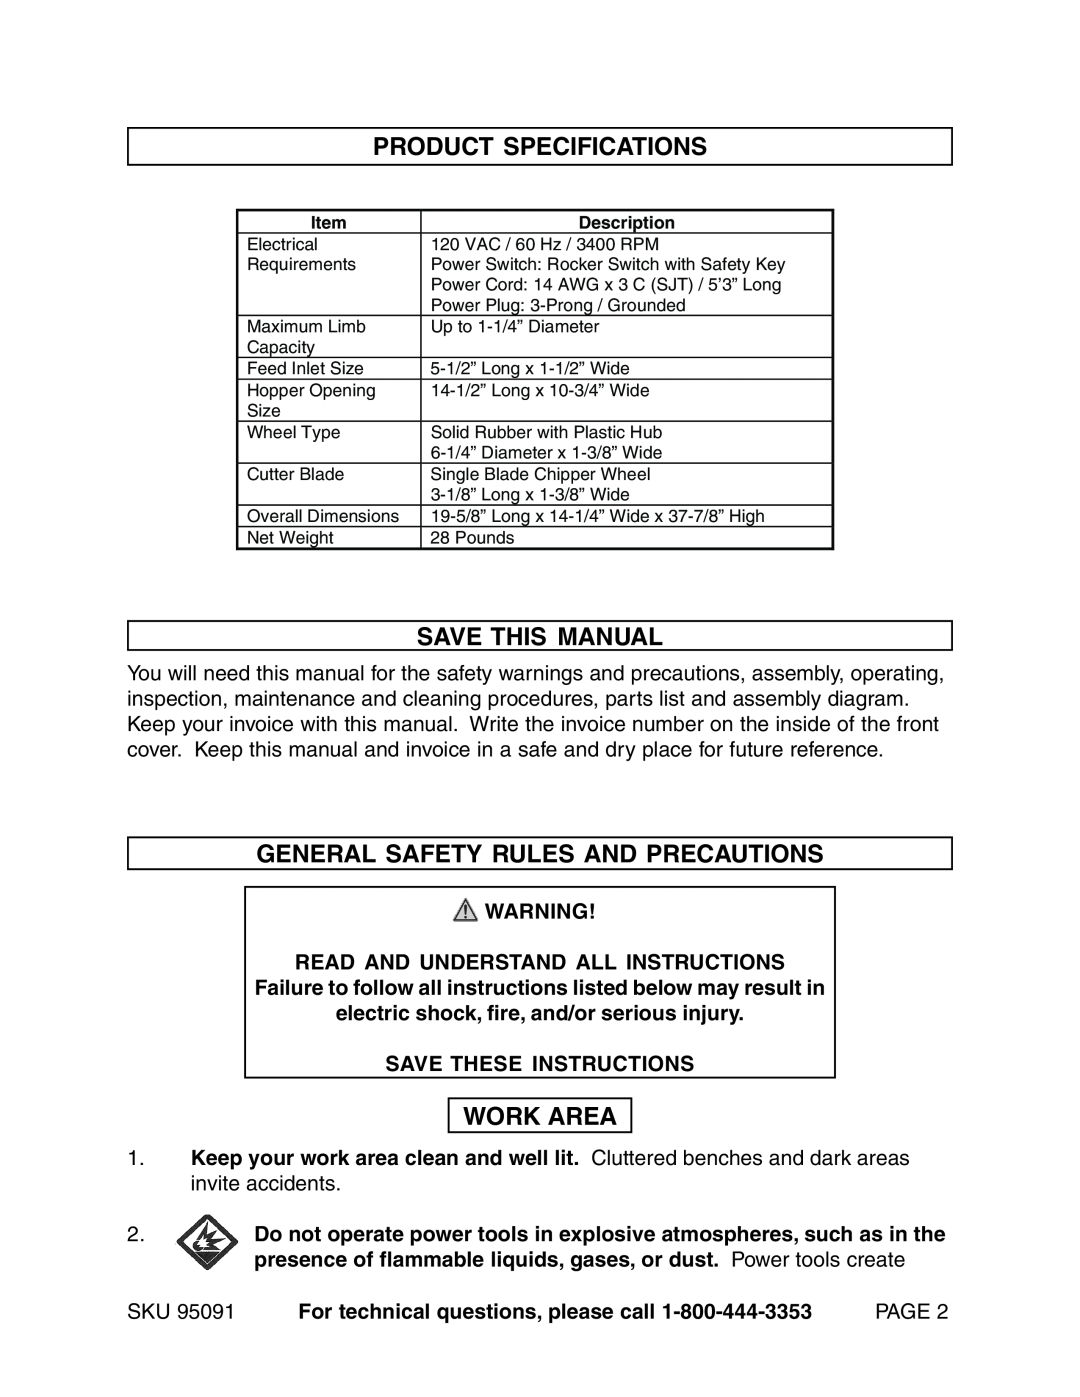 Harbor Freight Tools 95091 manual Product Specifications, Save This Manual, General Safety Rules And Precautions, Work Area 